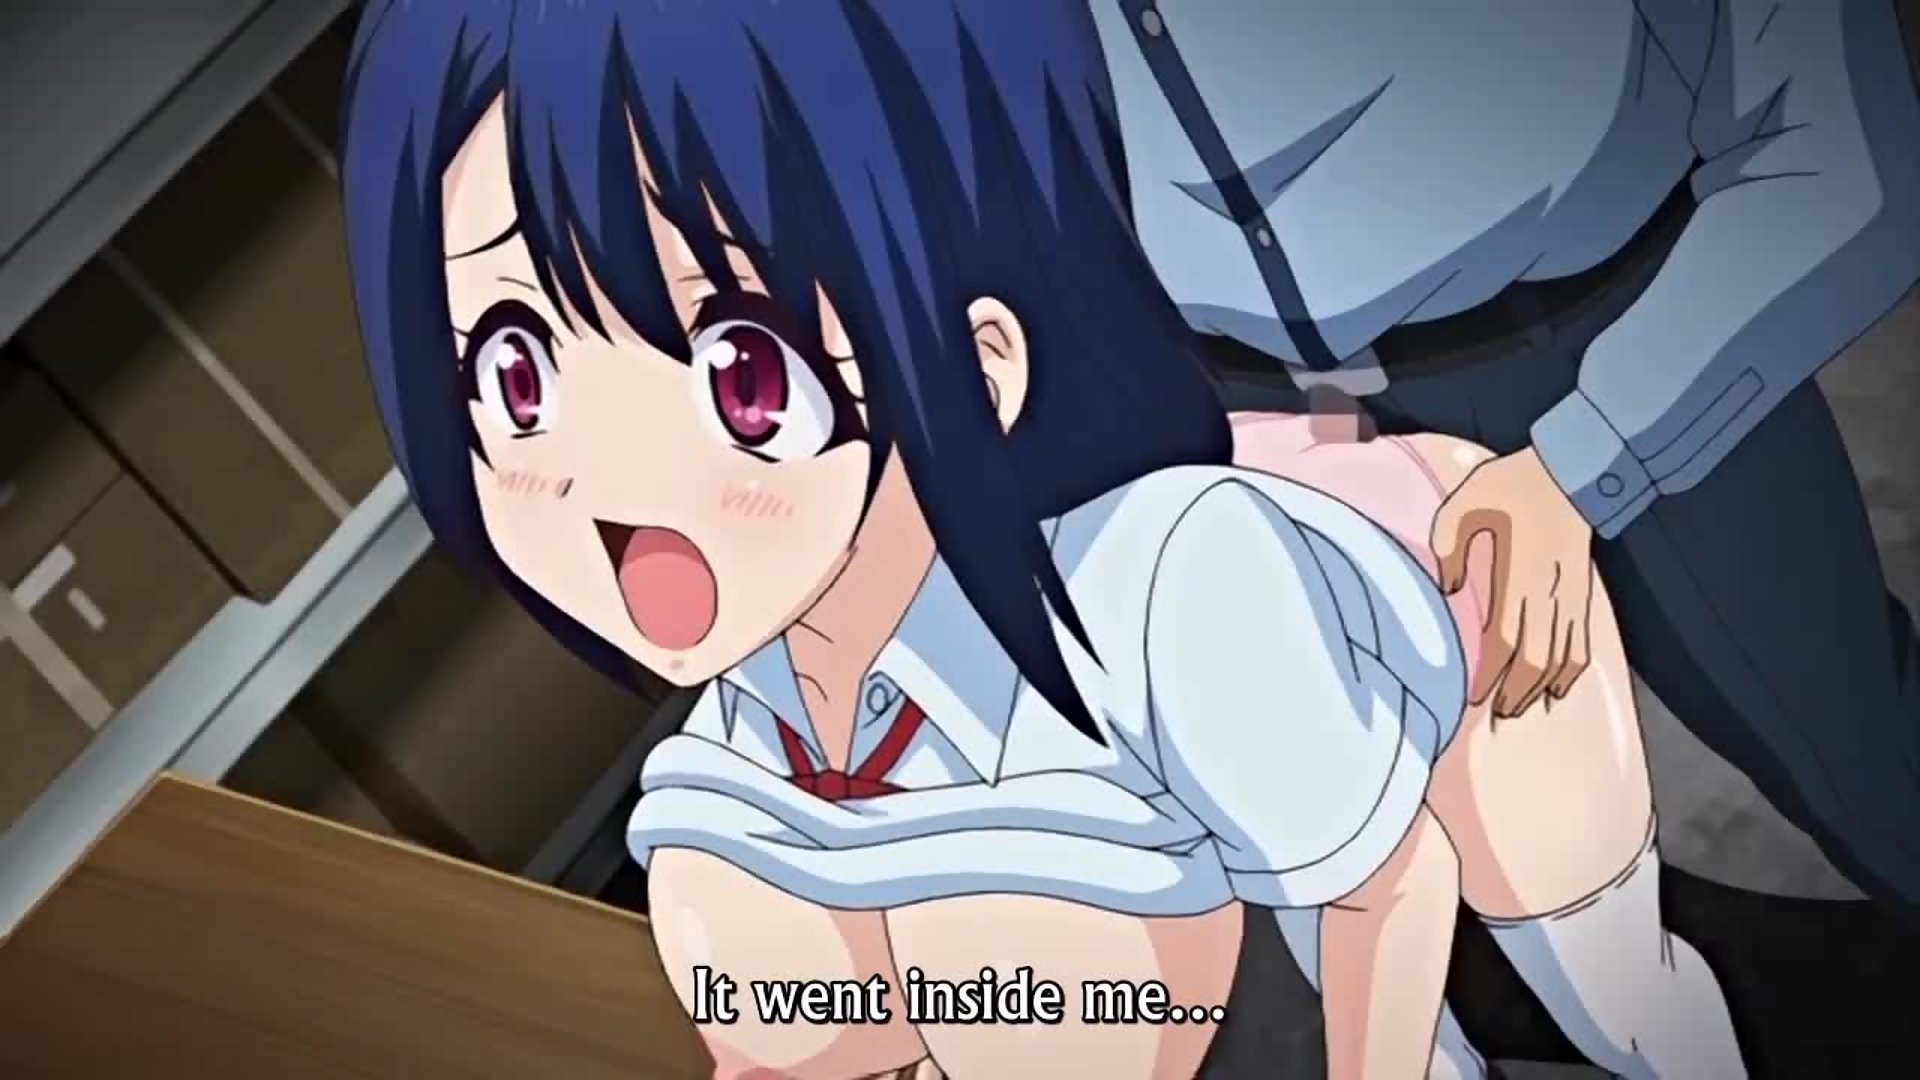 Fucks With School Watchman Porn - Peeping Girl 2 - Busty anime schoolgirl gets fucked by security guard while  friend watches - Hentai City